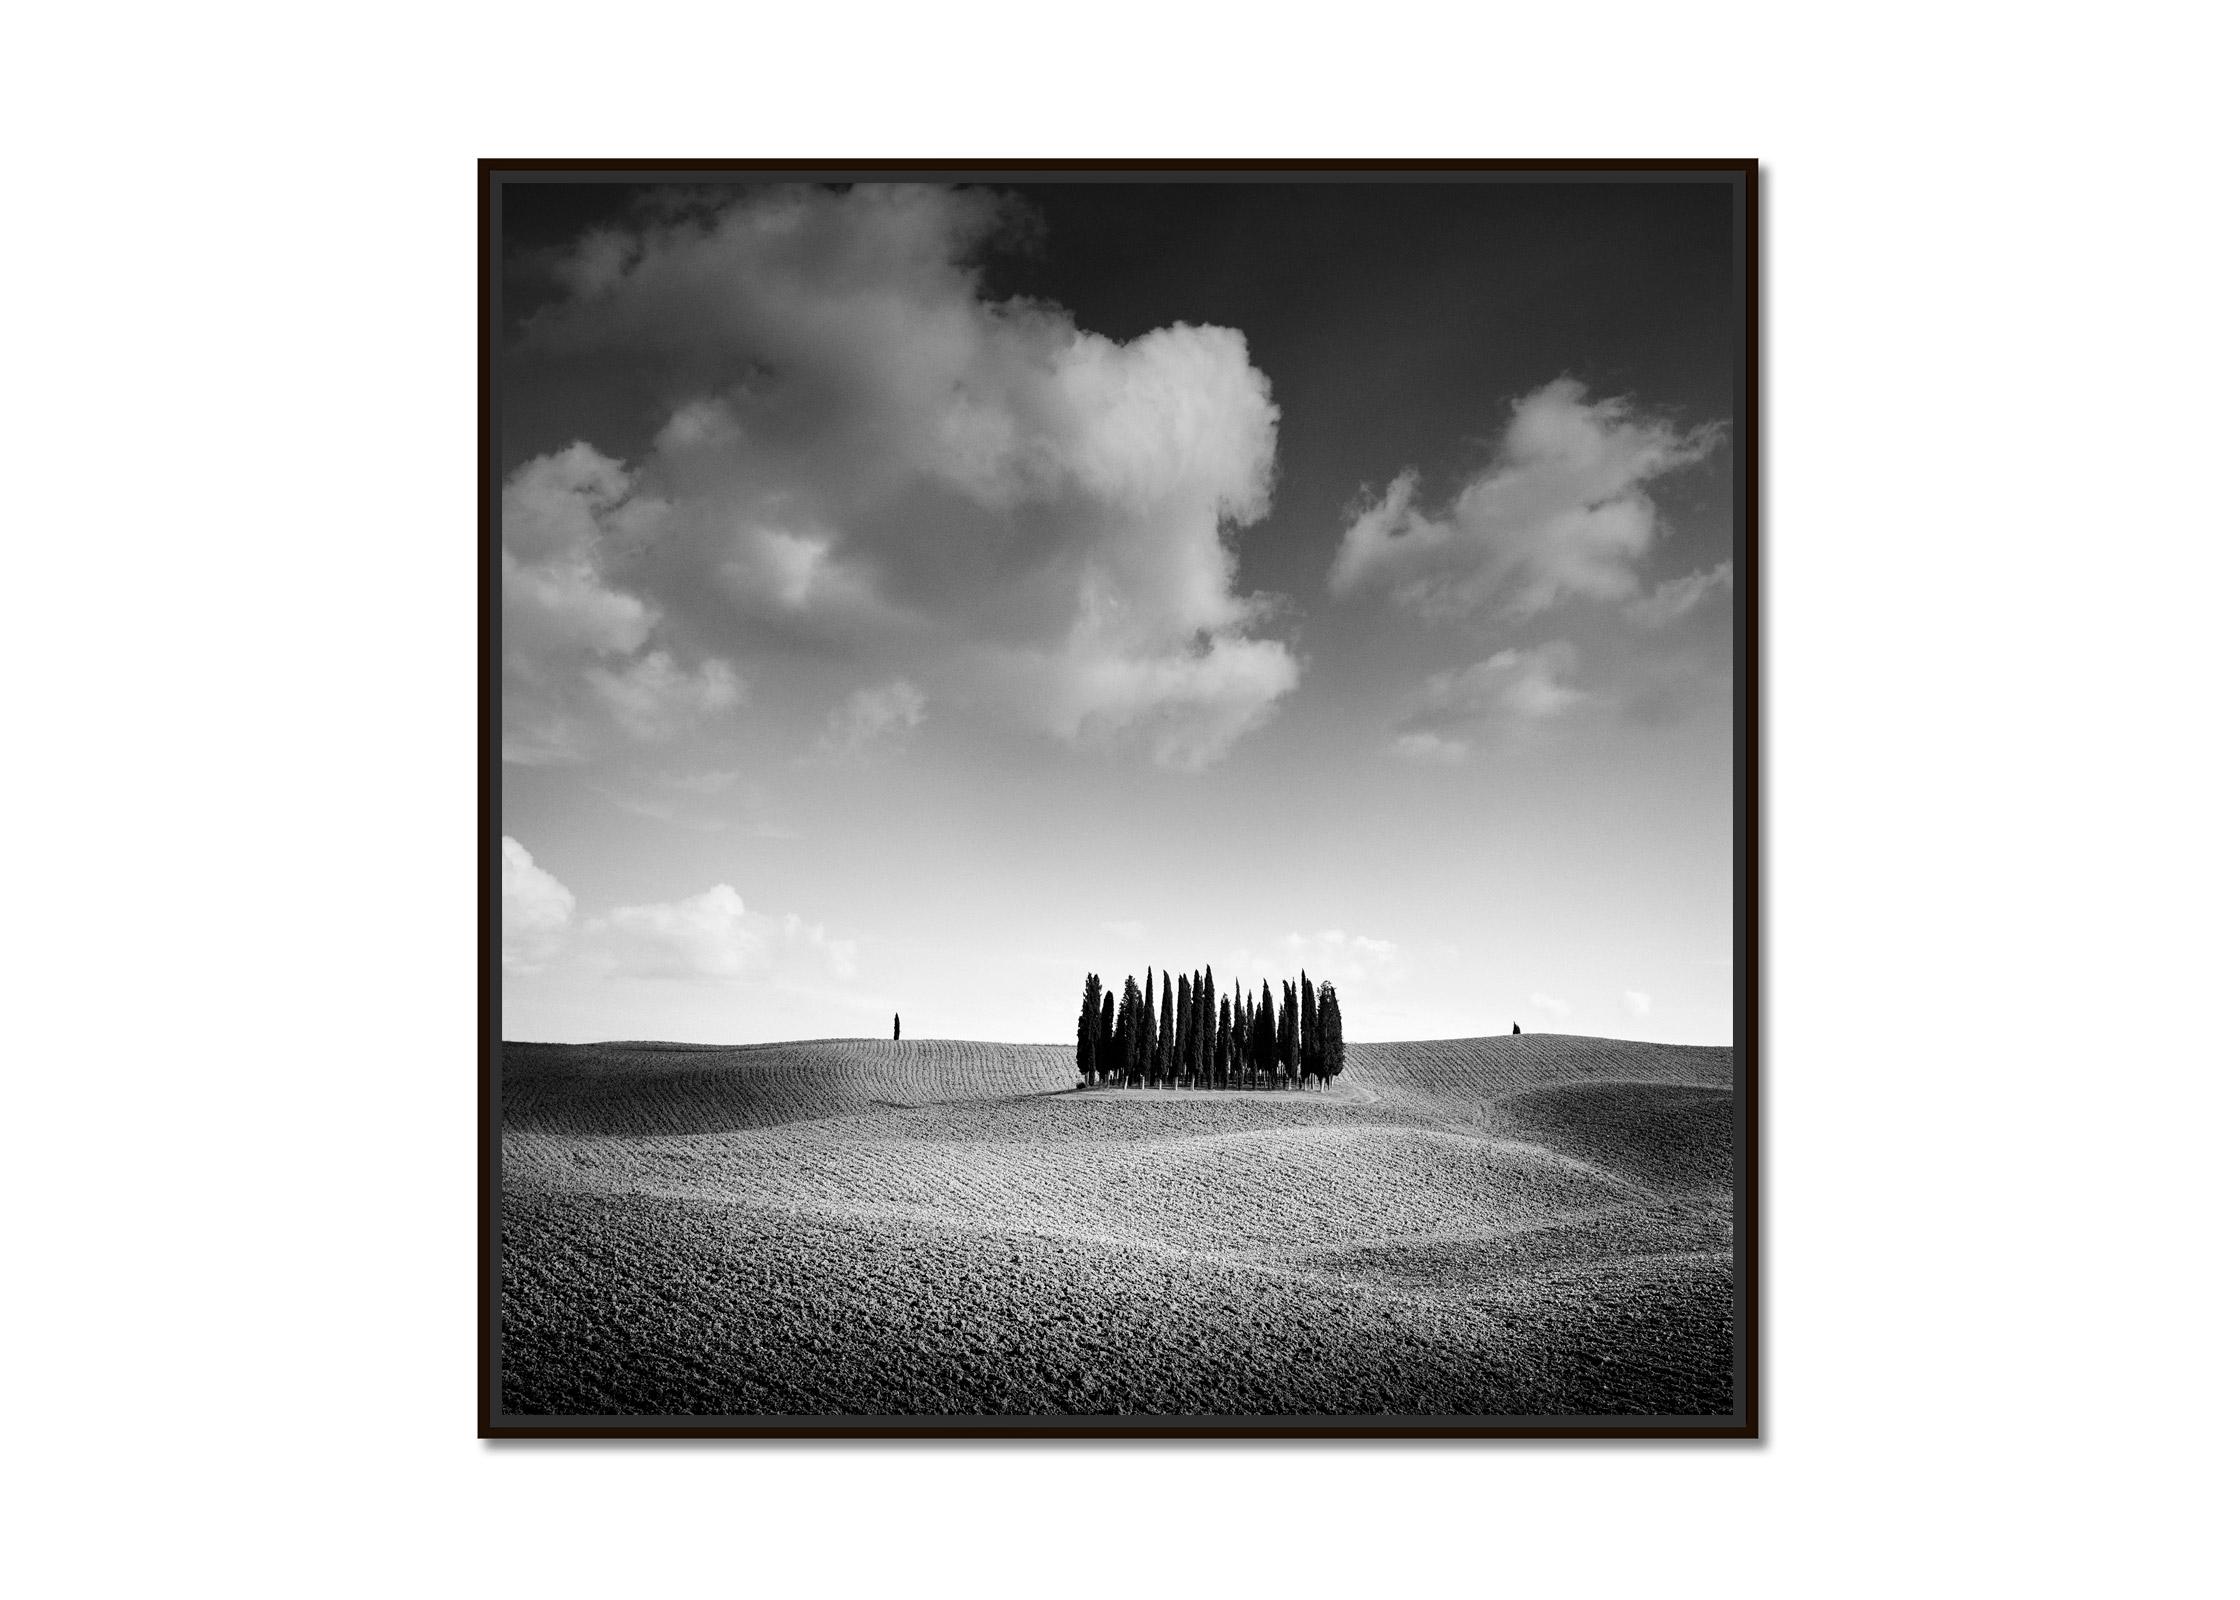   Cypress Hill, Tree, Tuscany, black and white fine art photography, landscape - Photograph by Gerald Berghammer